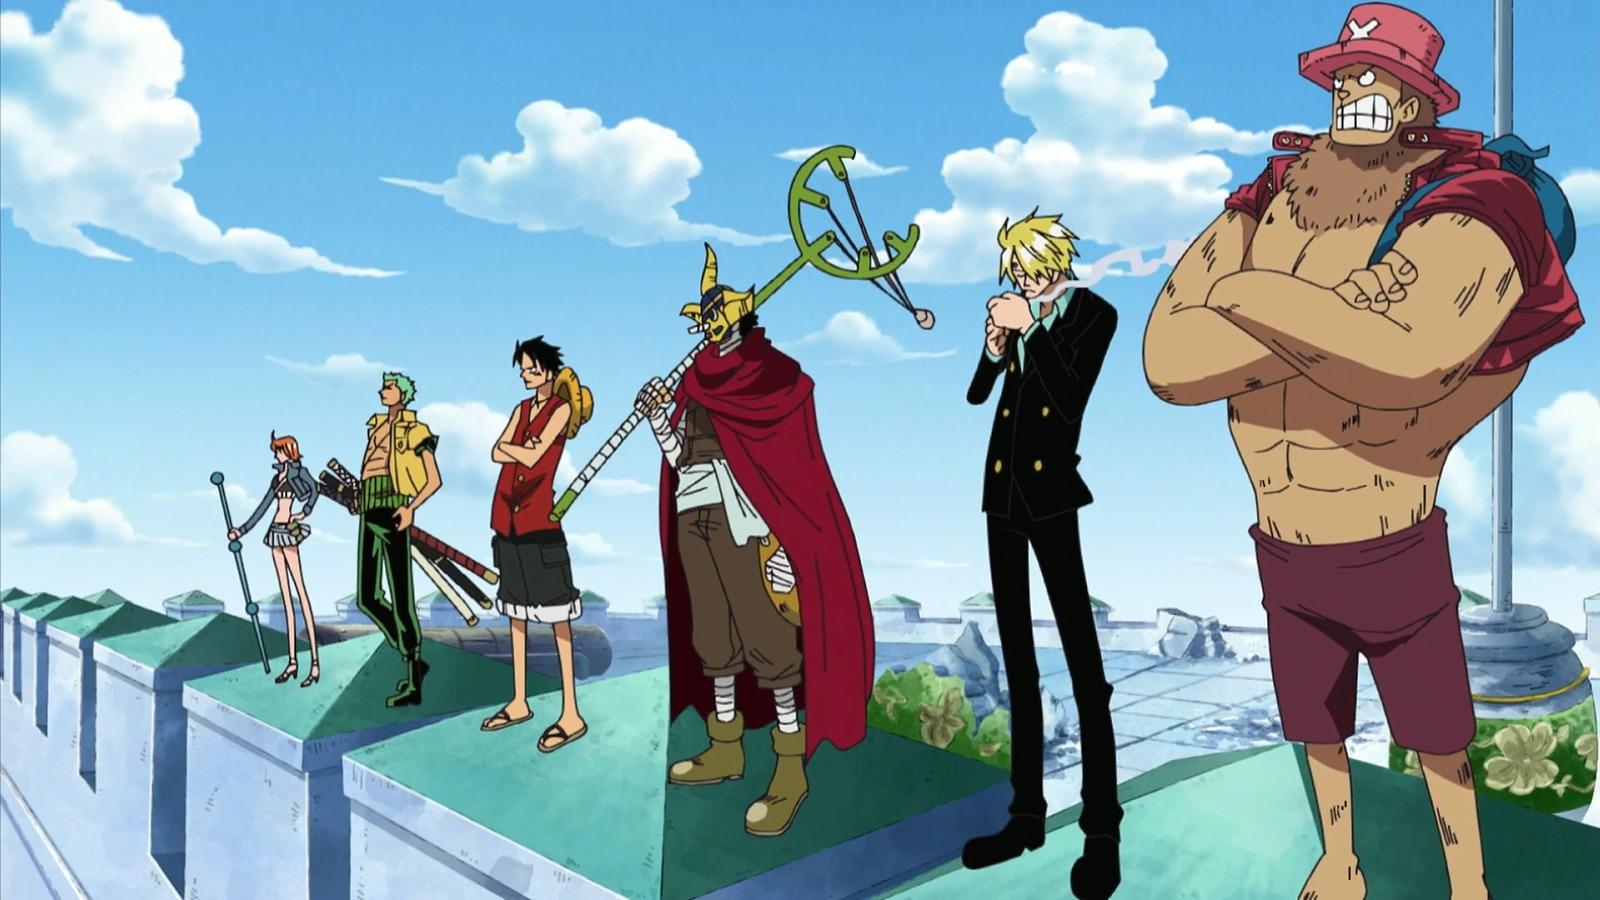 An image of Enies Lobby arc in One Piece